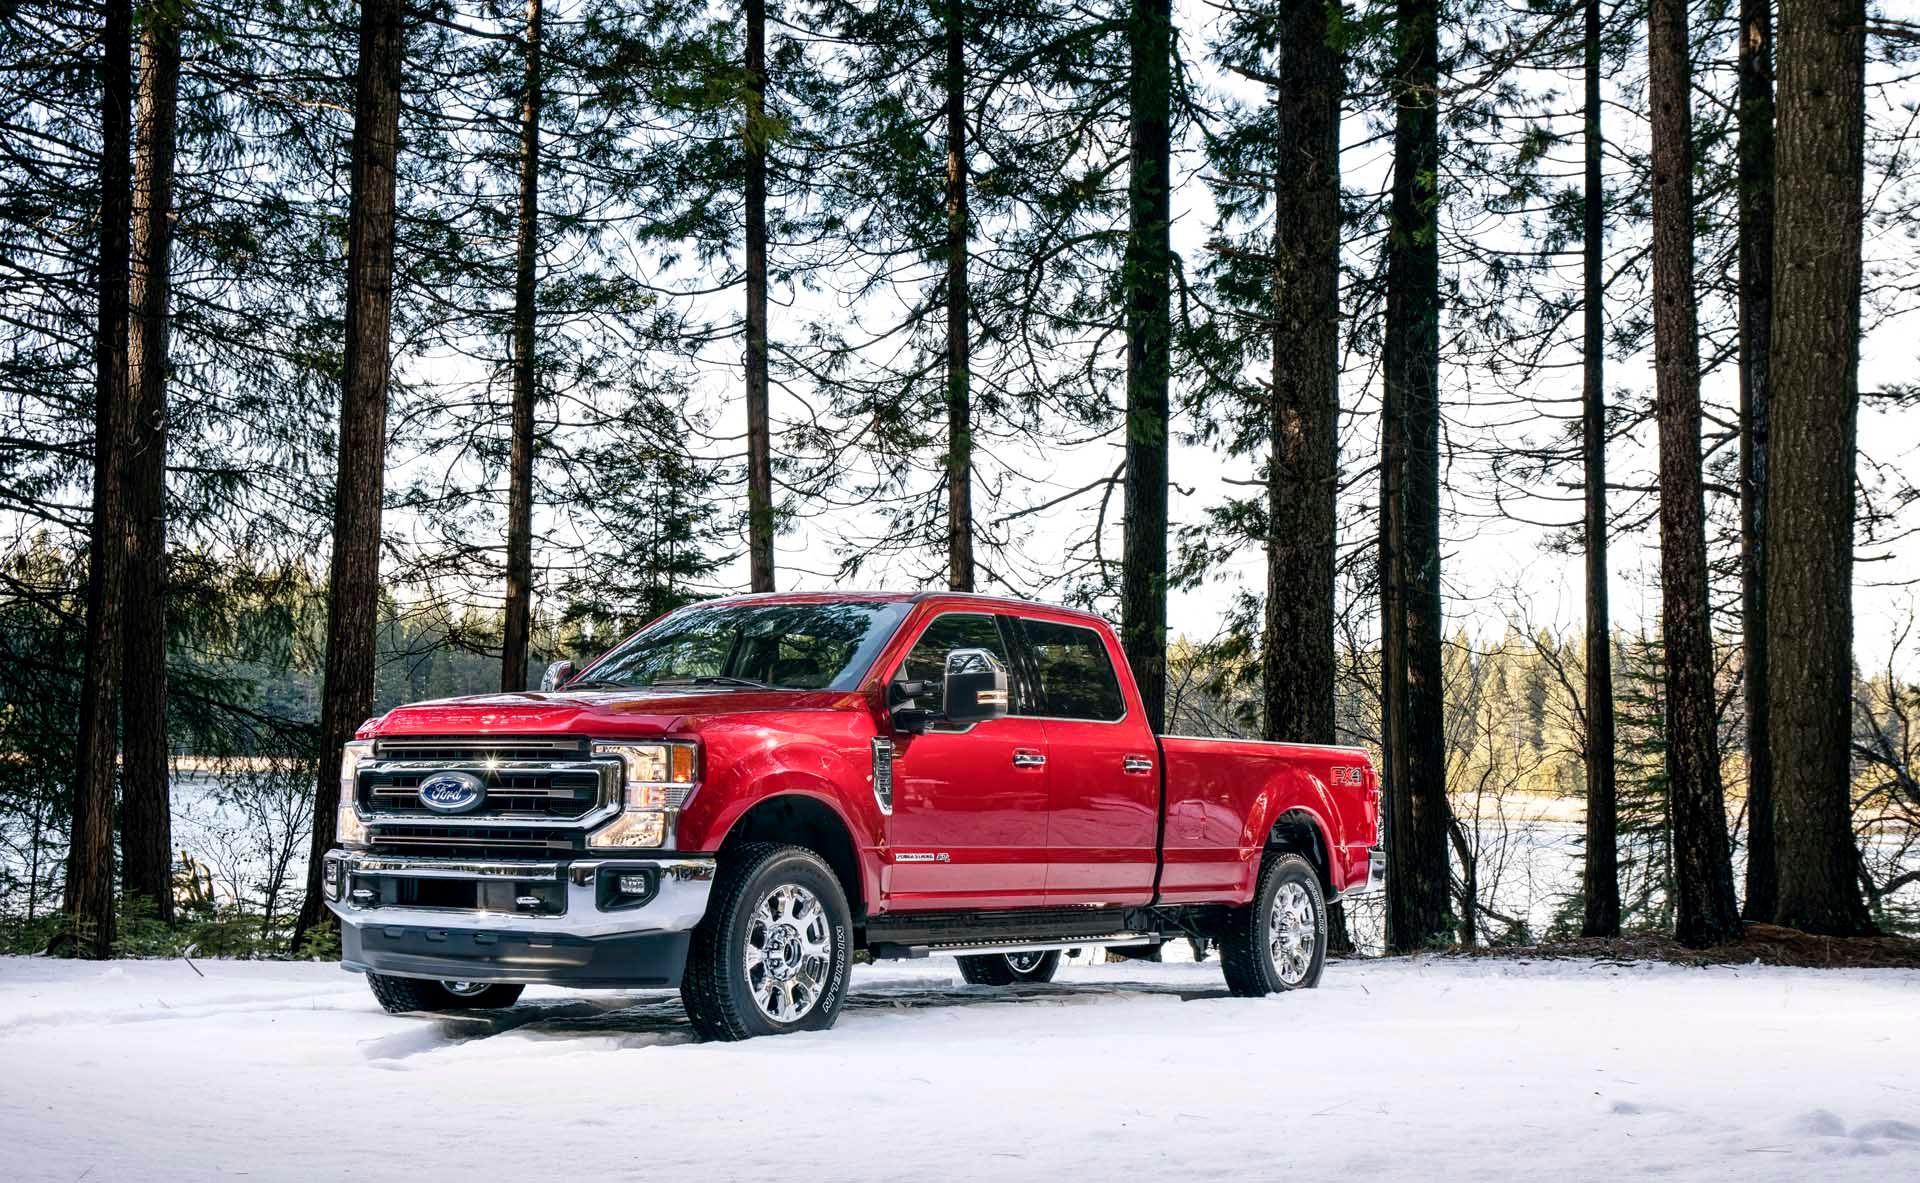 An Image Of The 2021 Ford F-250 Super Duty In The Snow